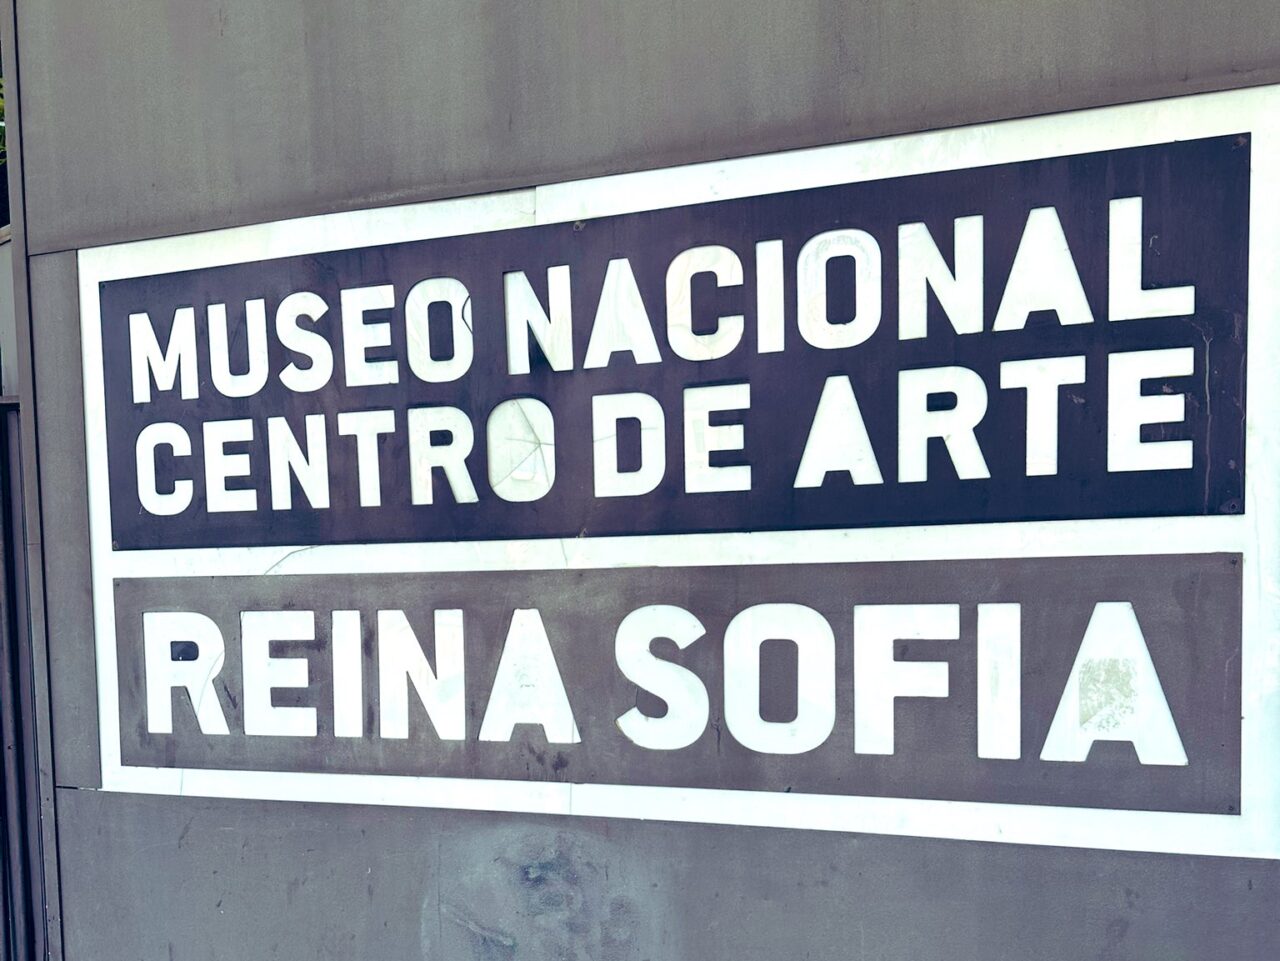 Naveen Pemmaraju: Completely Amazed by the art exhibits my first time at Reina Sofia and Thyssen museums